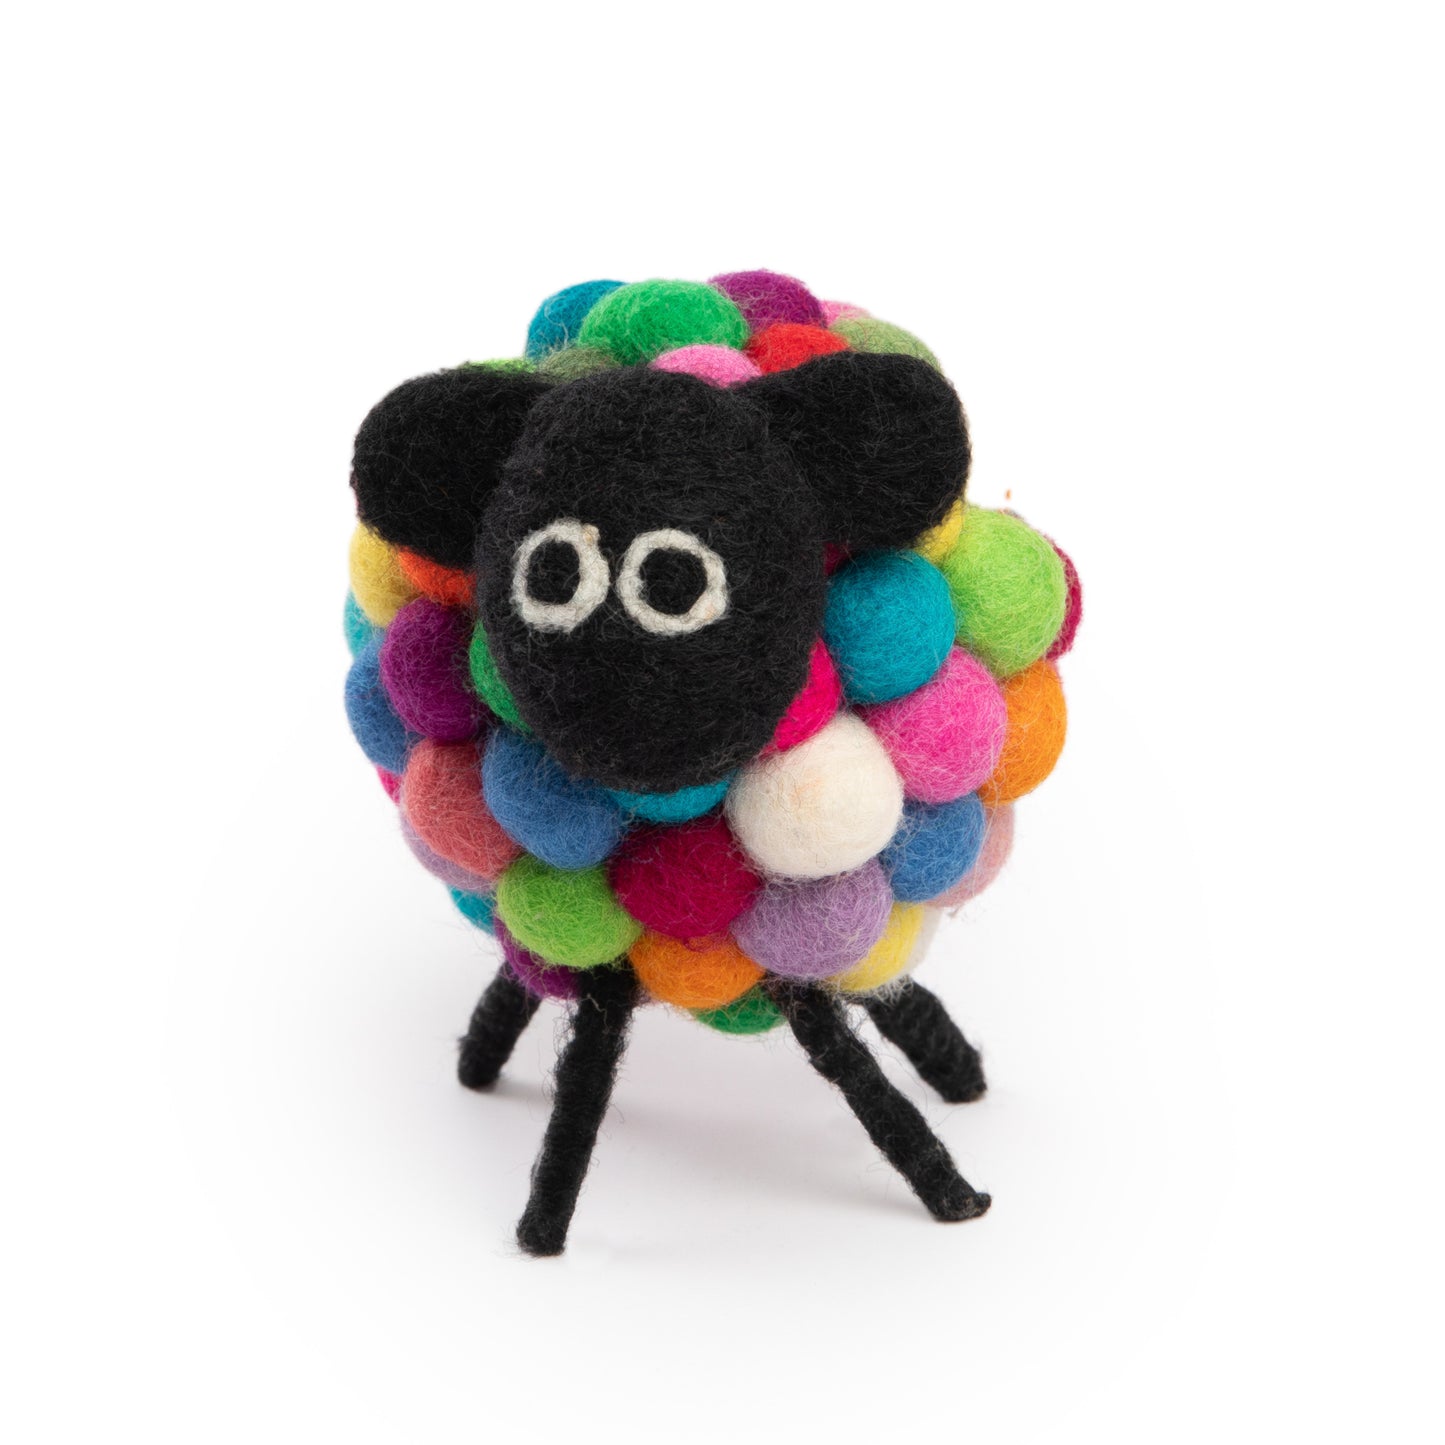 Handcrafted felt wool sheep figurine with intricate detailing, perfect for home décor or as a children's toy